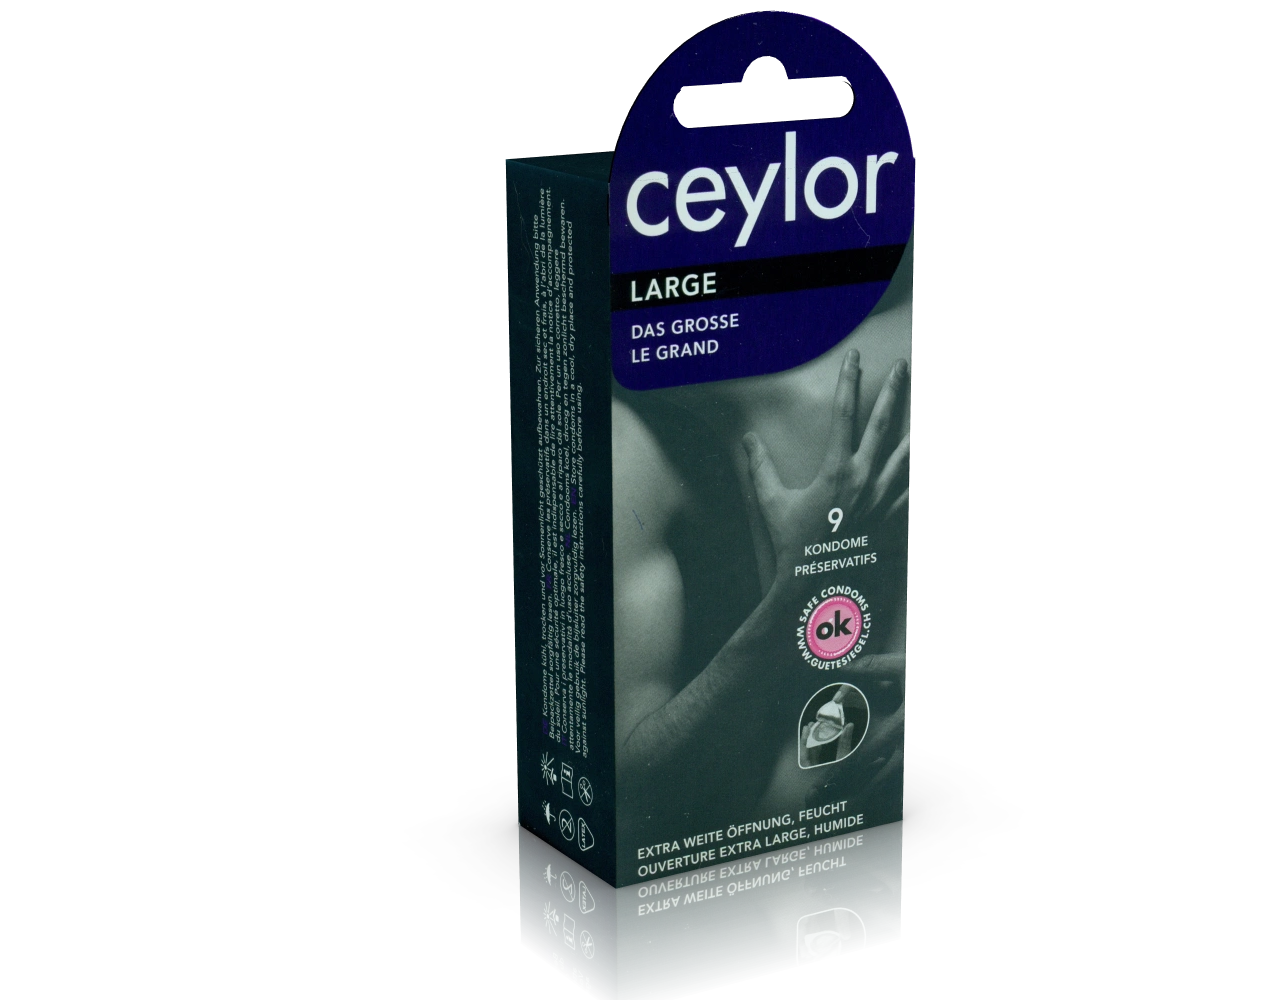 Ceylor «Large» 9 extra wide condoms with cream lubricant, hygienically sealed in condom pods